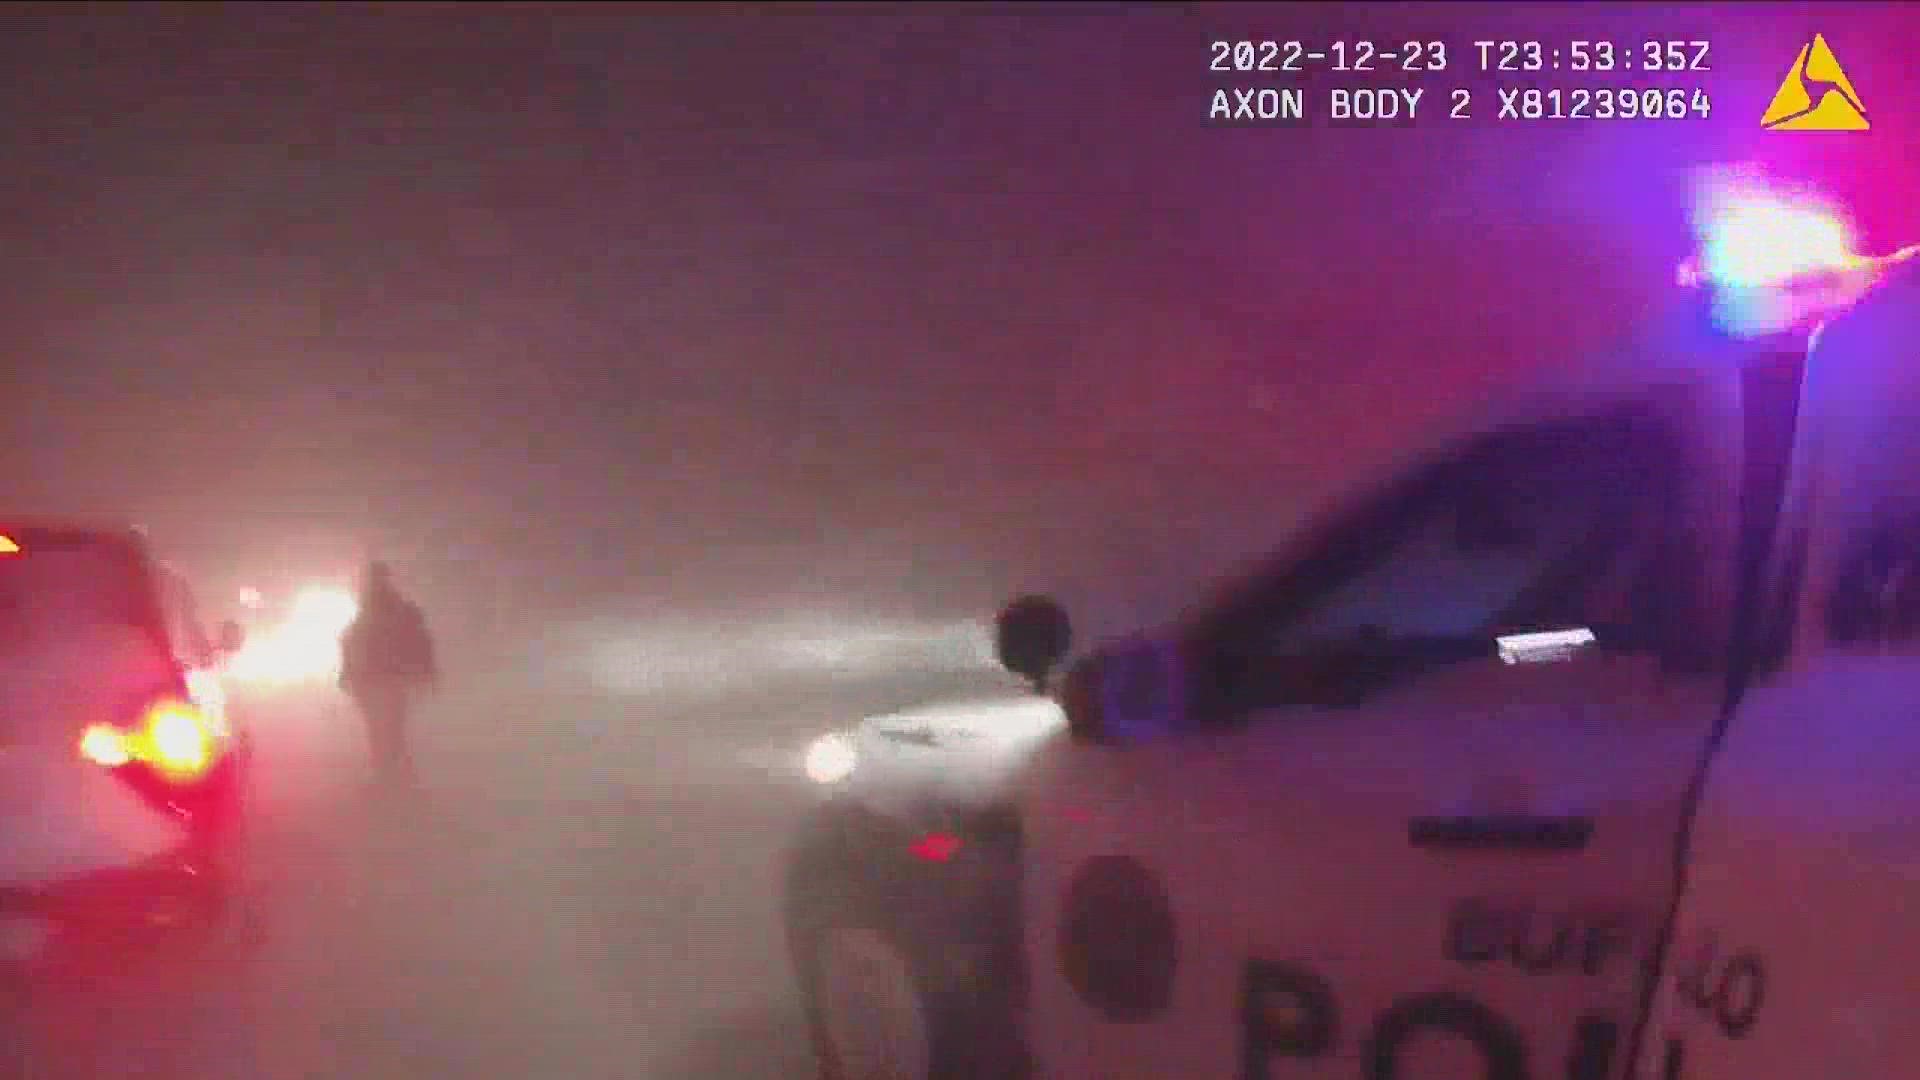 The department released six videos, which show heroic efforts from police officers.